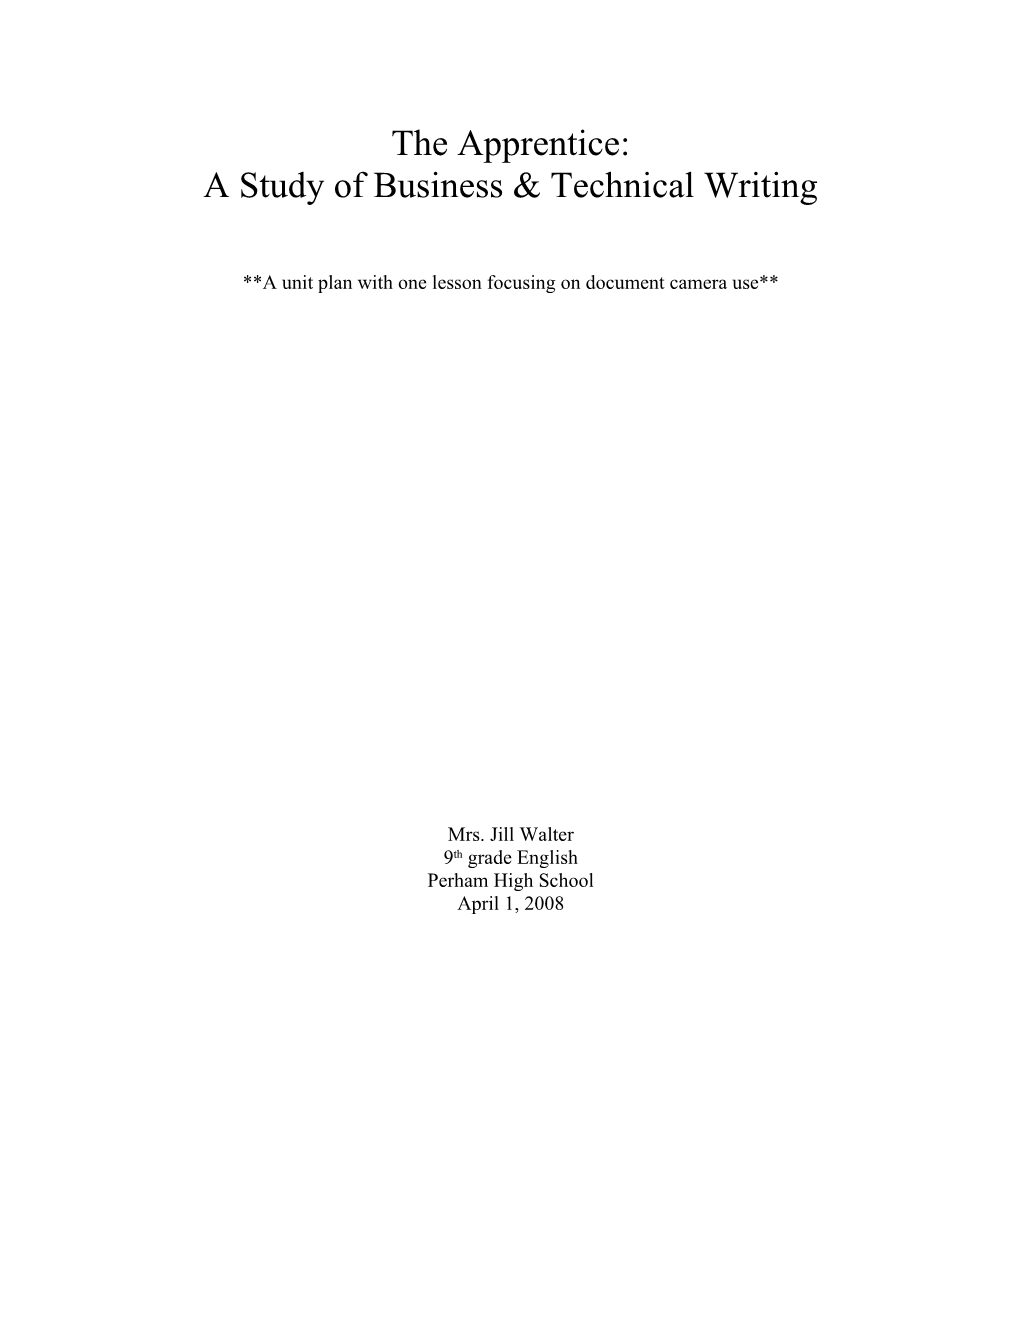 A Study of Business & Technical Writing